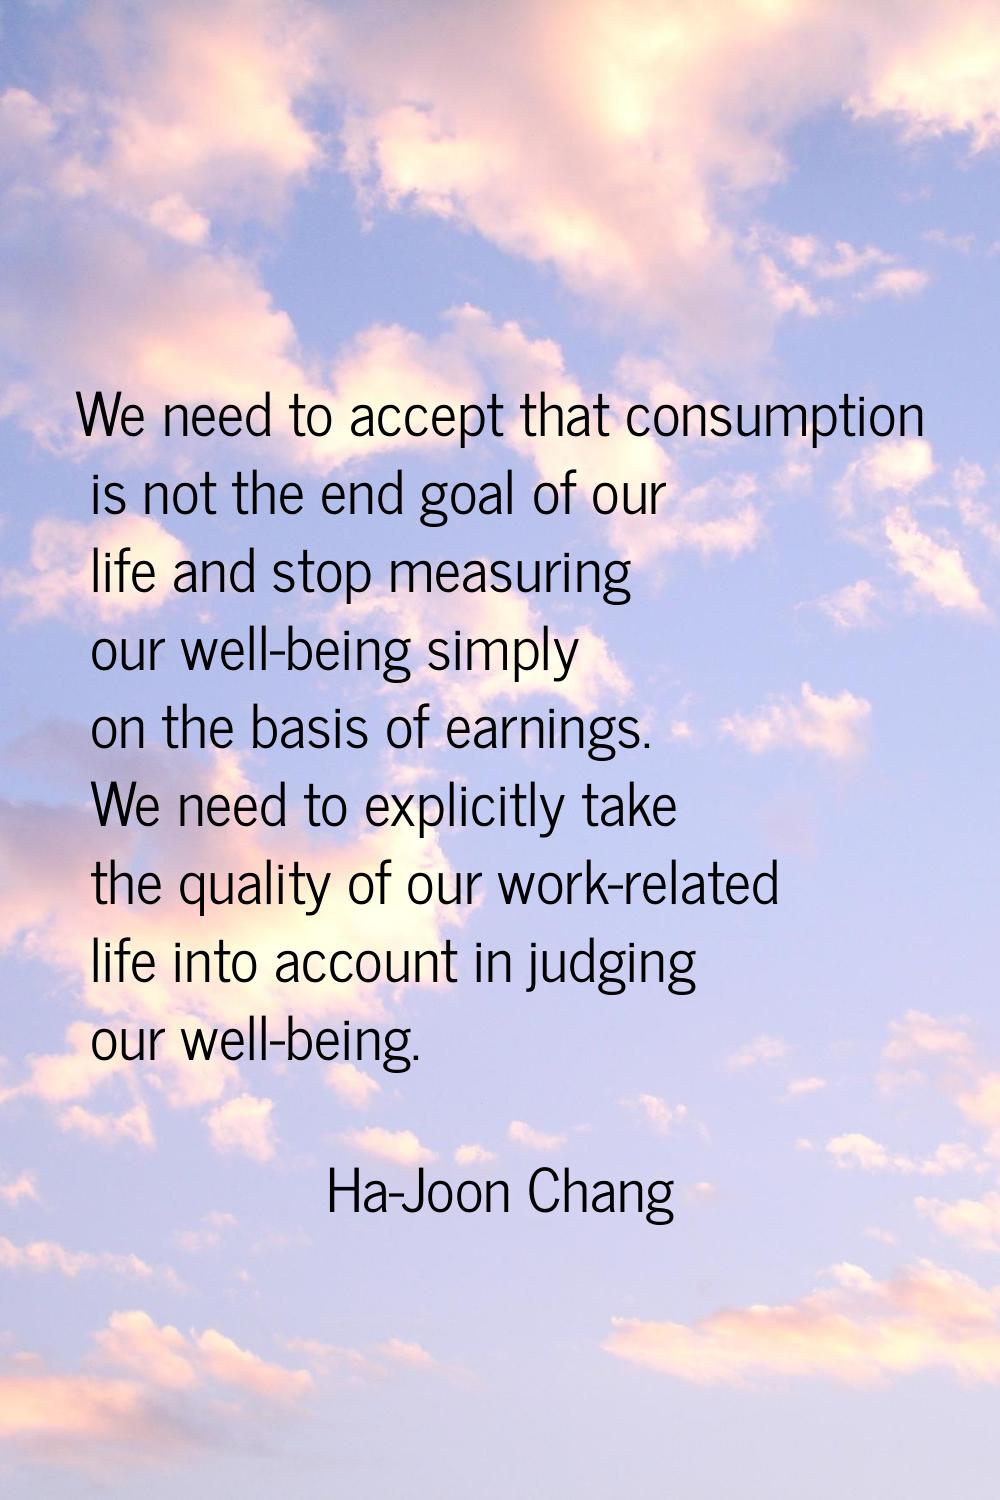 We need to accept that consumption is not the end goal of our life and stop measuring our well-bein